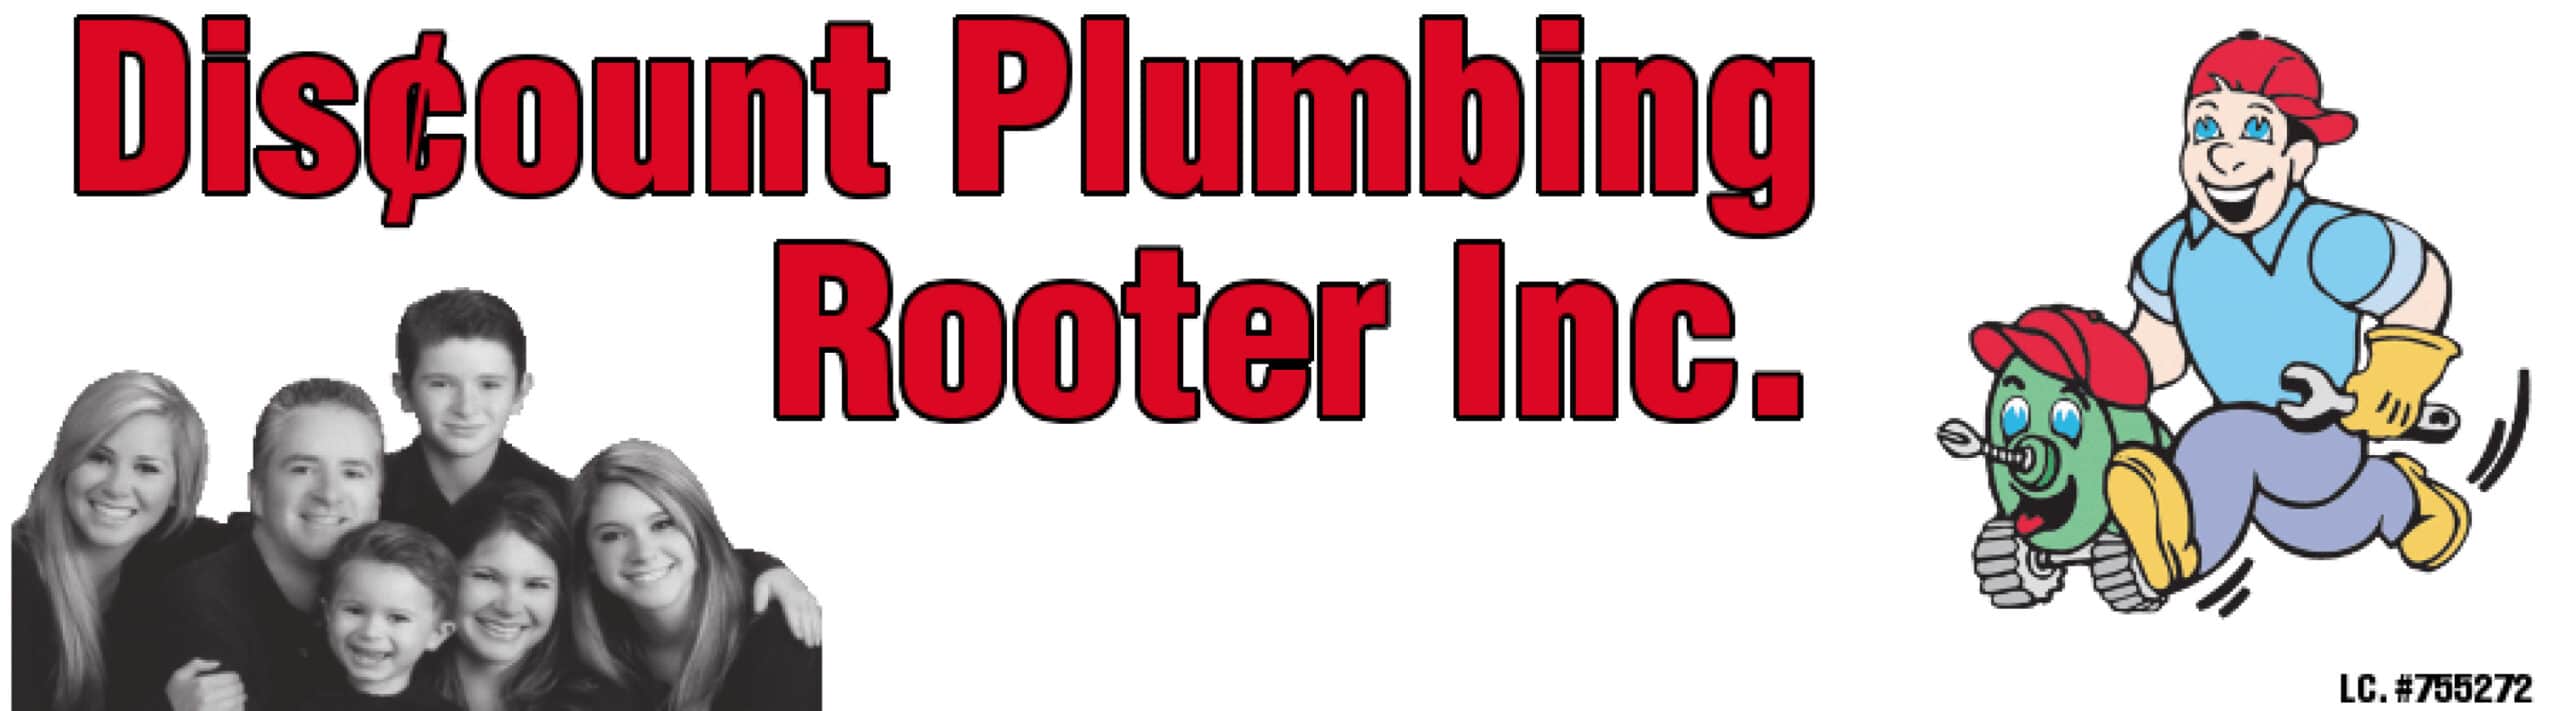 Leading Plumbing Company Offers Comprehensive and Cost-Effective Services Throughout the San Francisco Bay Area